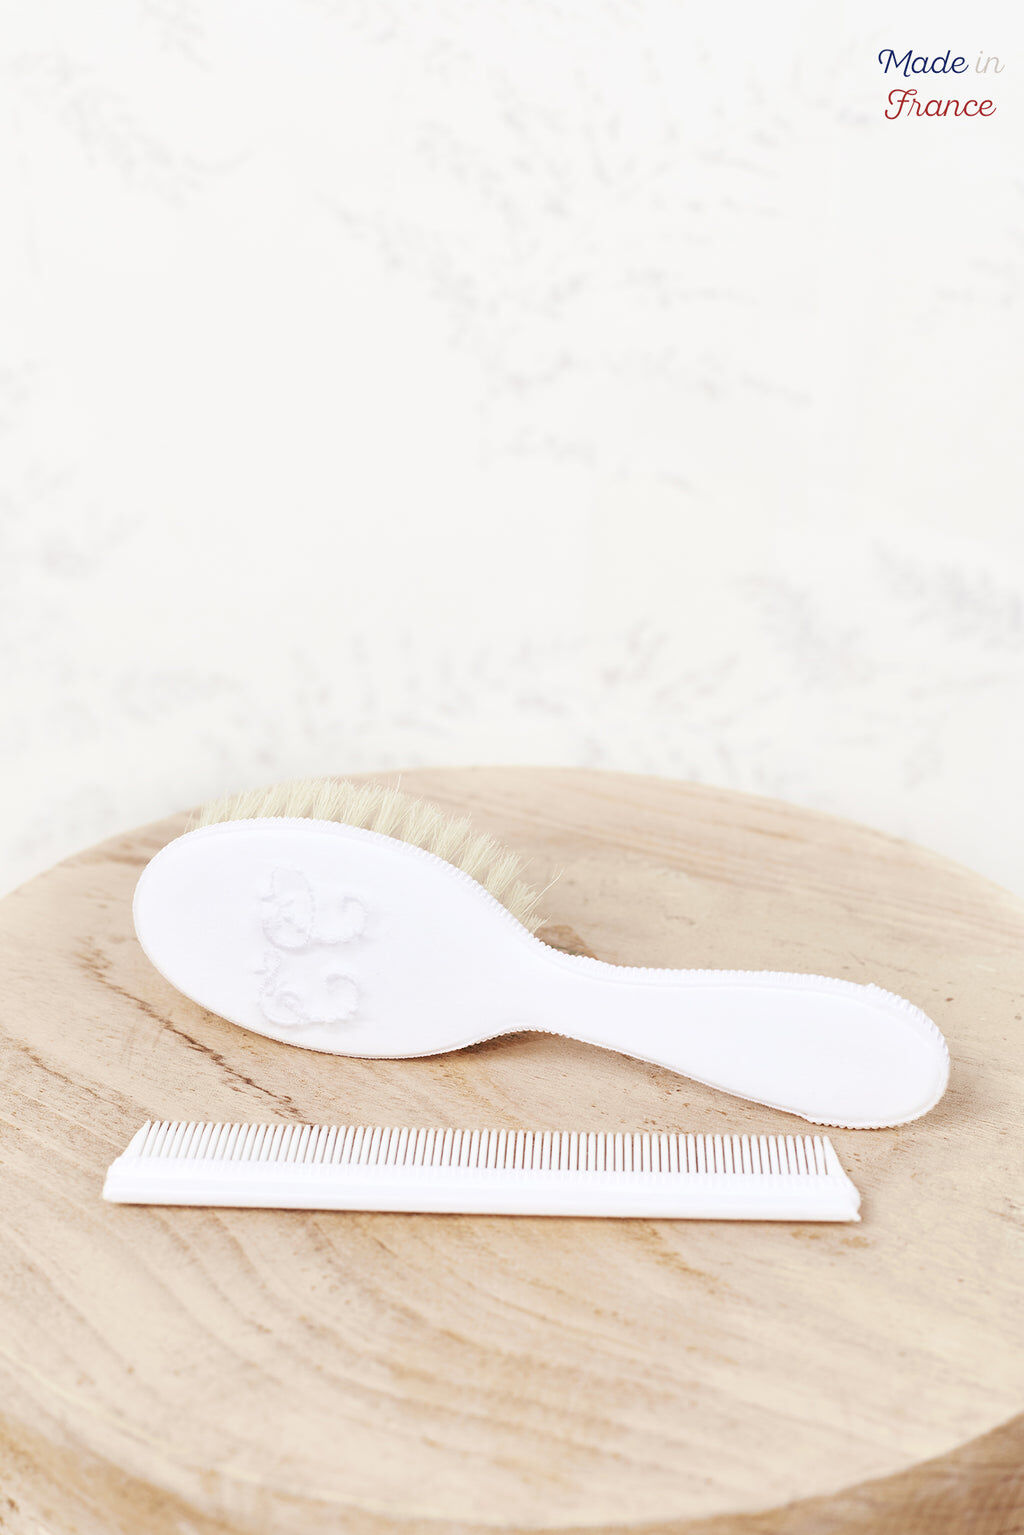 Brush & Comb - Monogramme Made In France